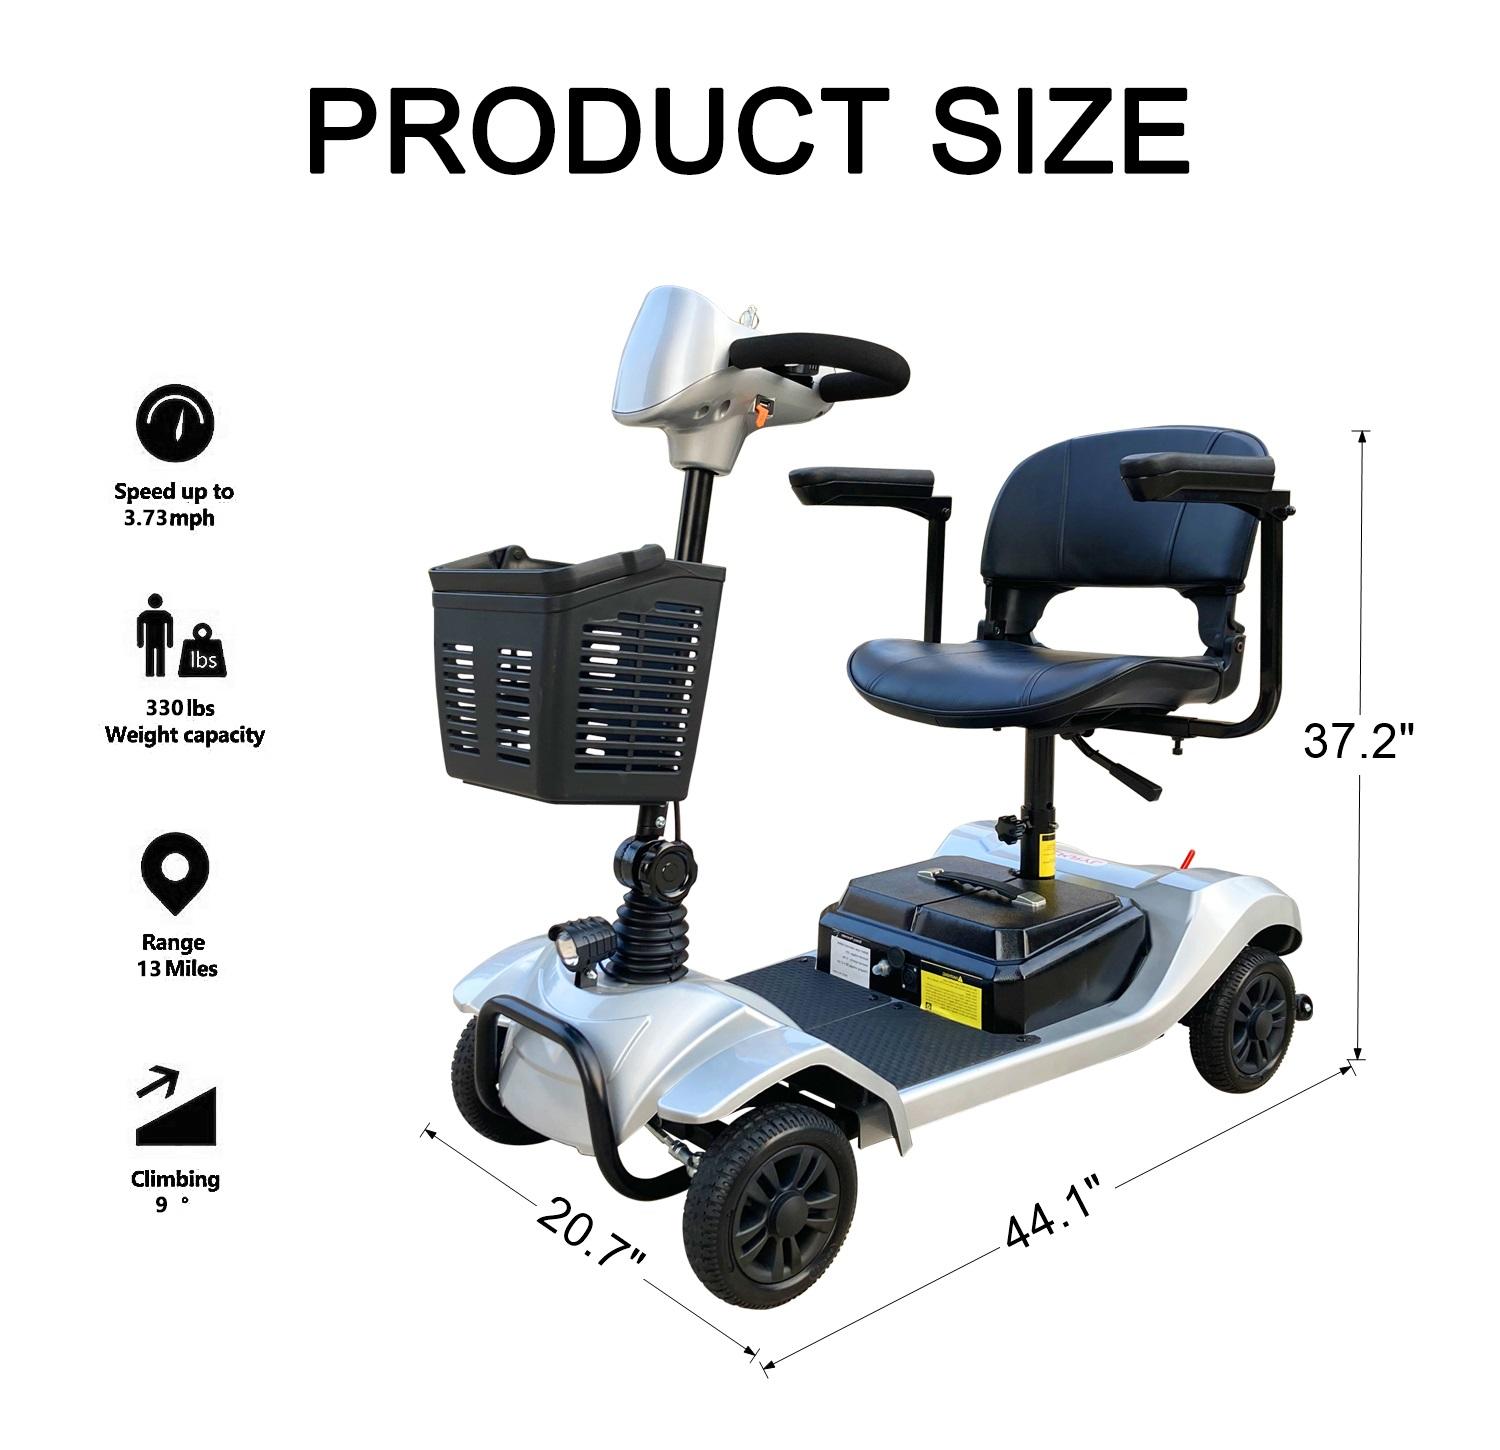 Emotor Silver 330lbs Mobility Scooter for Seniors Elderly Adults, 250W Strong Motor w/ Stable 4 Wheels Scooter for Outdoor Driving